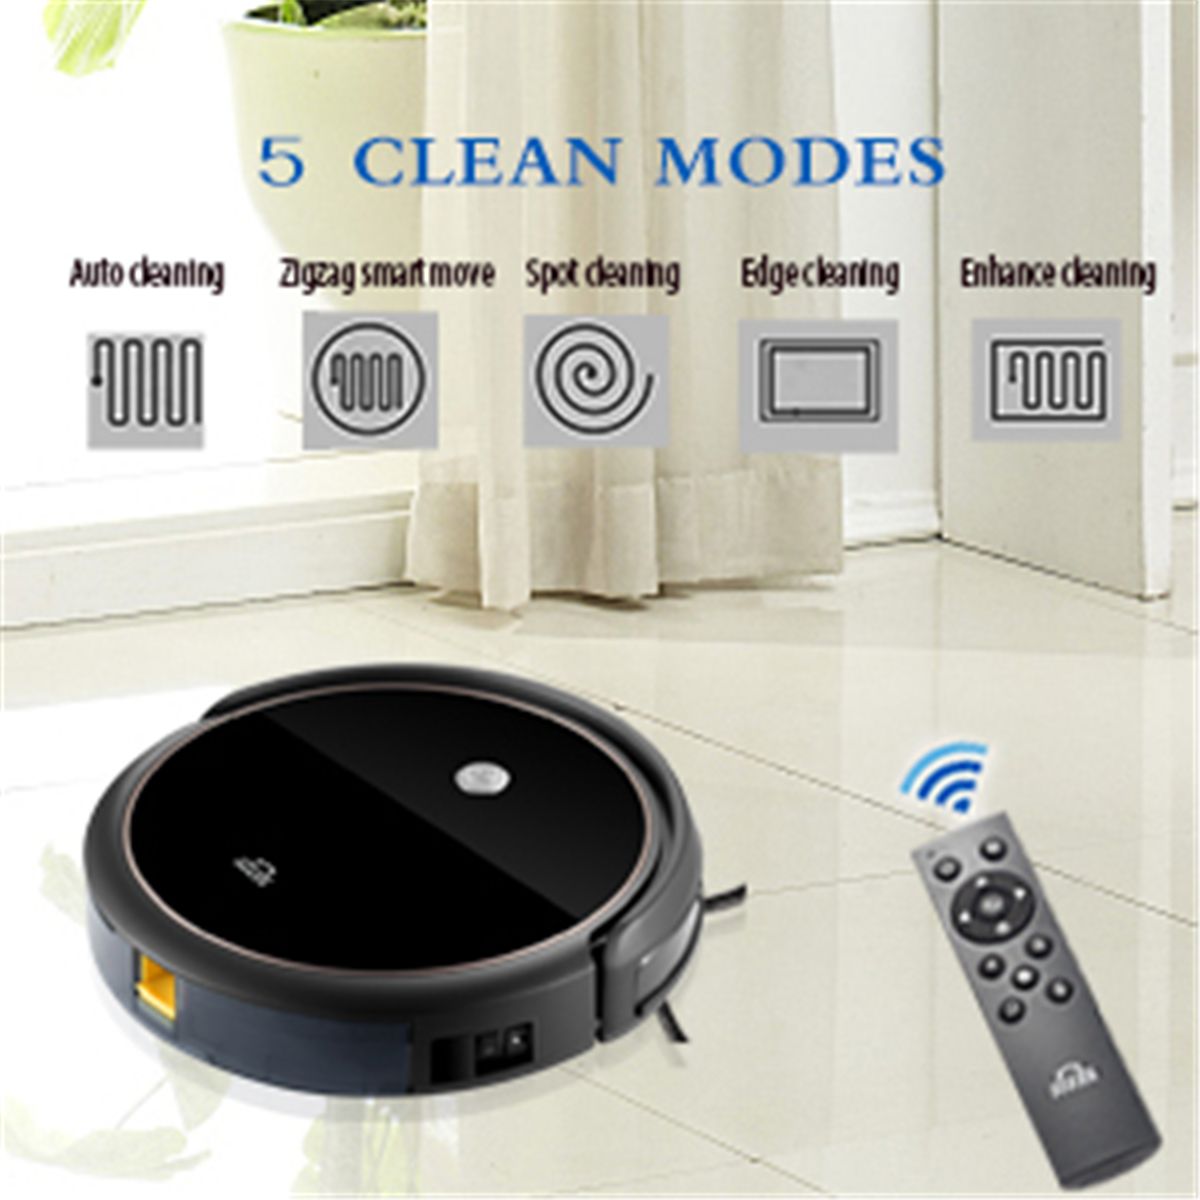 Vacuum-Cleaning-Auto-Robot-Smart-Sweeping-Robot-Floor-Dirt-Dust-Hair-Automatic-Cleaner-For-Home-Elec-1590177